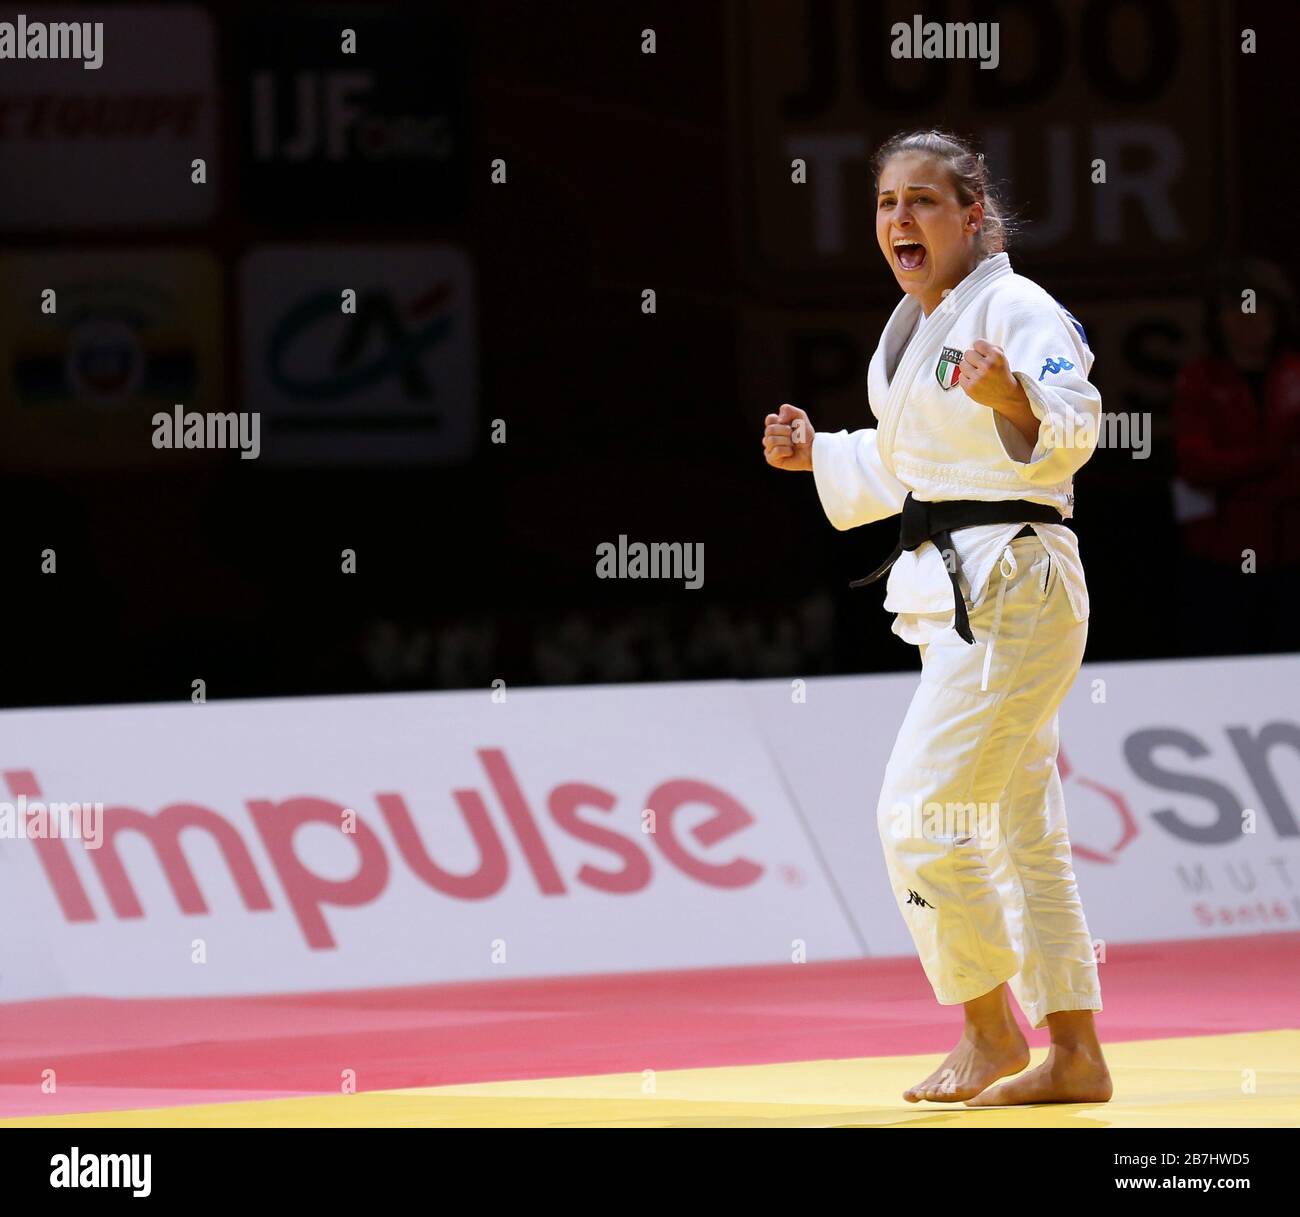 Paris, France - 08th Feb, 2020: Odette Giuffrida for Italy against Astride Gneto for France, Women's -52kg, Semi-Final (Credit: Mickael Chavet) Stock Photo